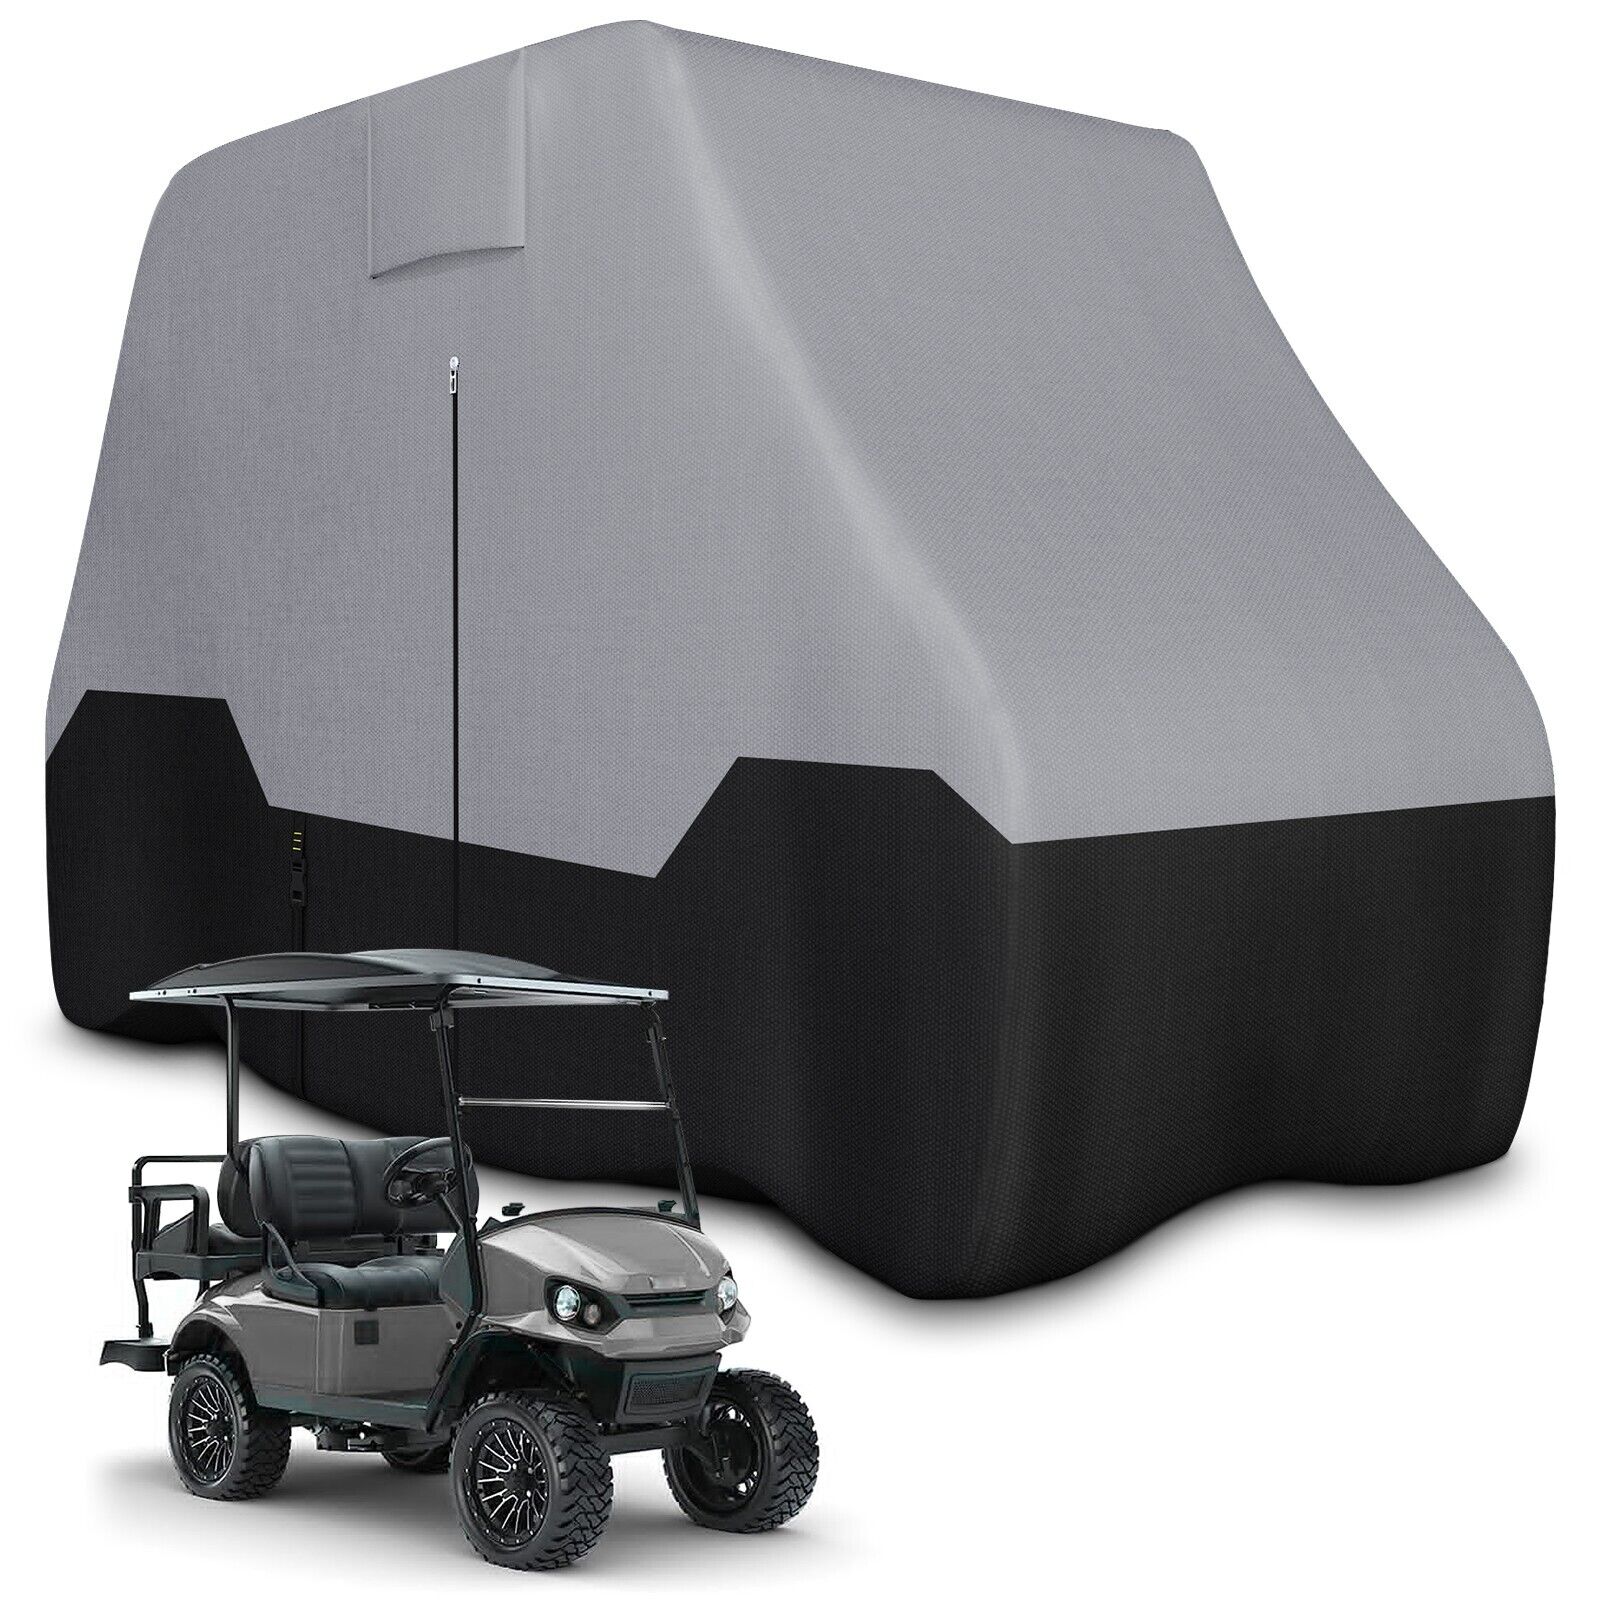 2/4 Passenger Golf Cart Cover with Waterproof Strips Fit EZGO, Club Car, Yamaha